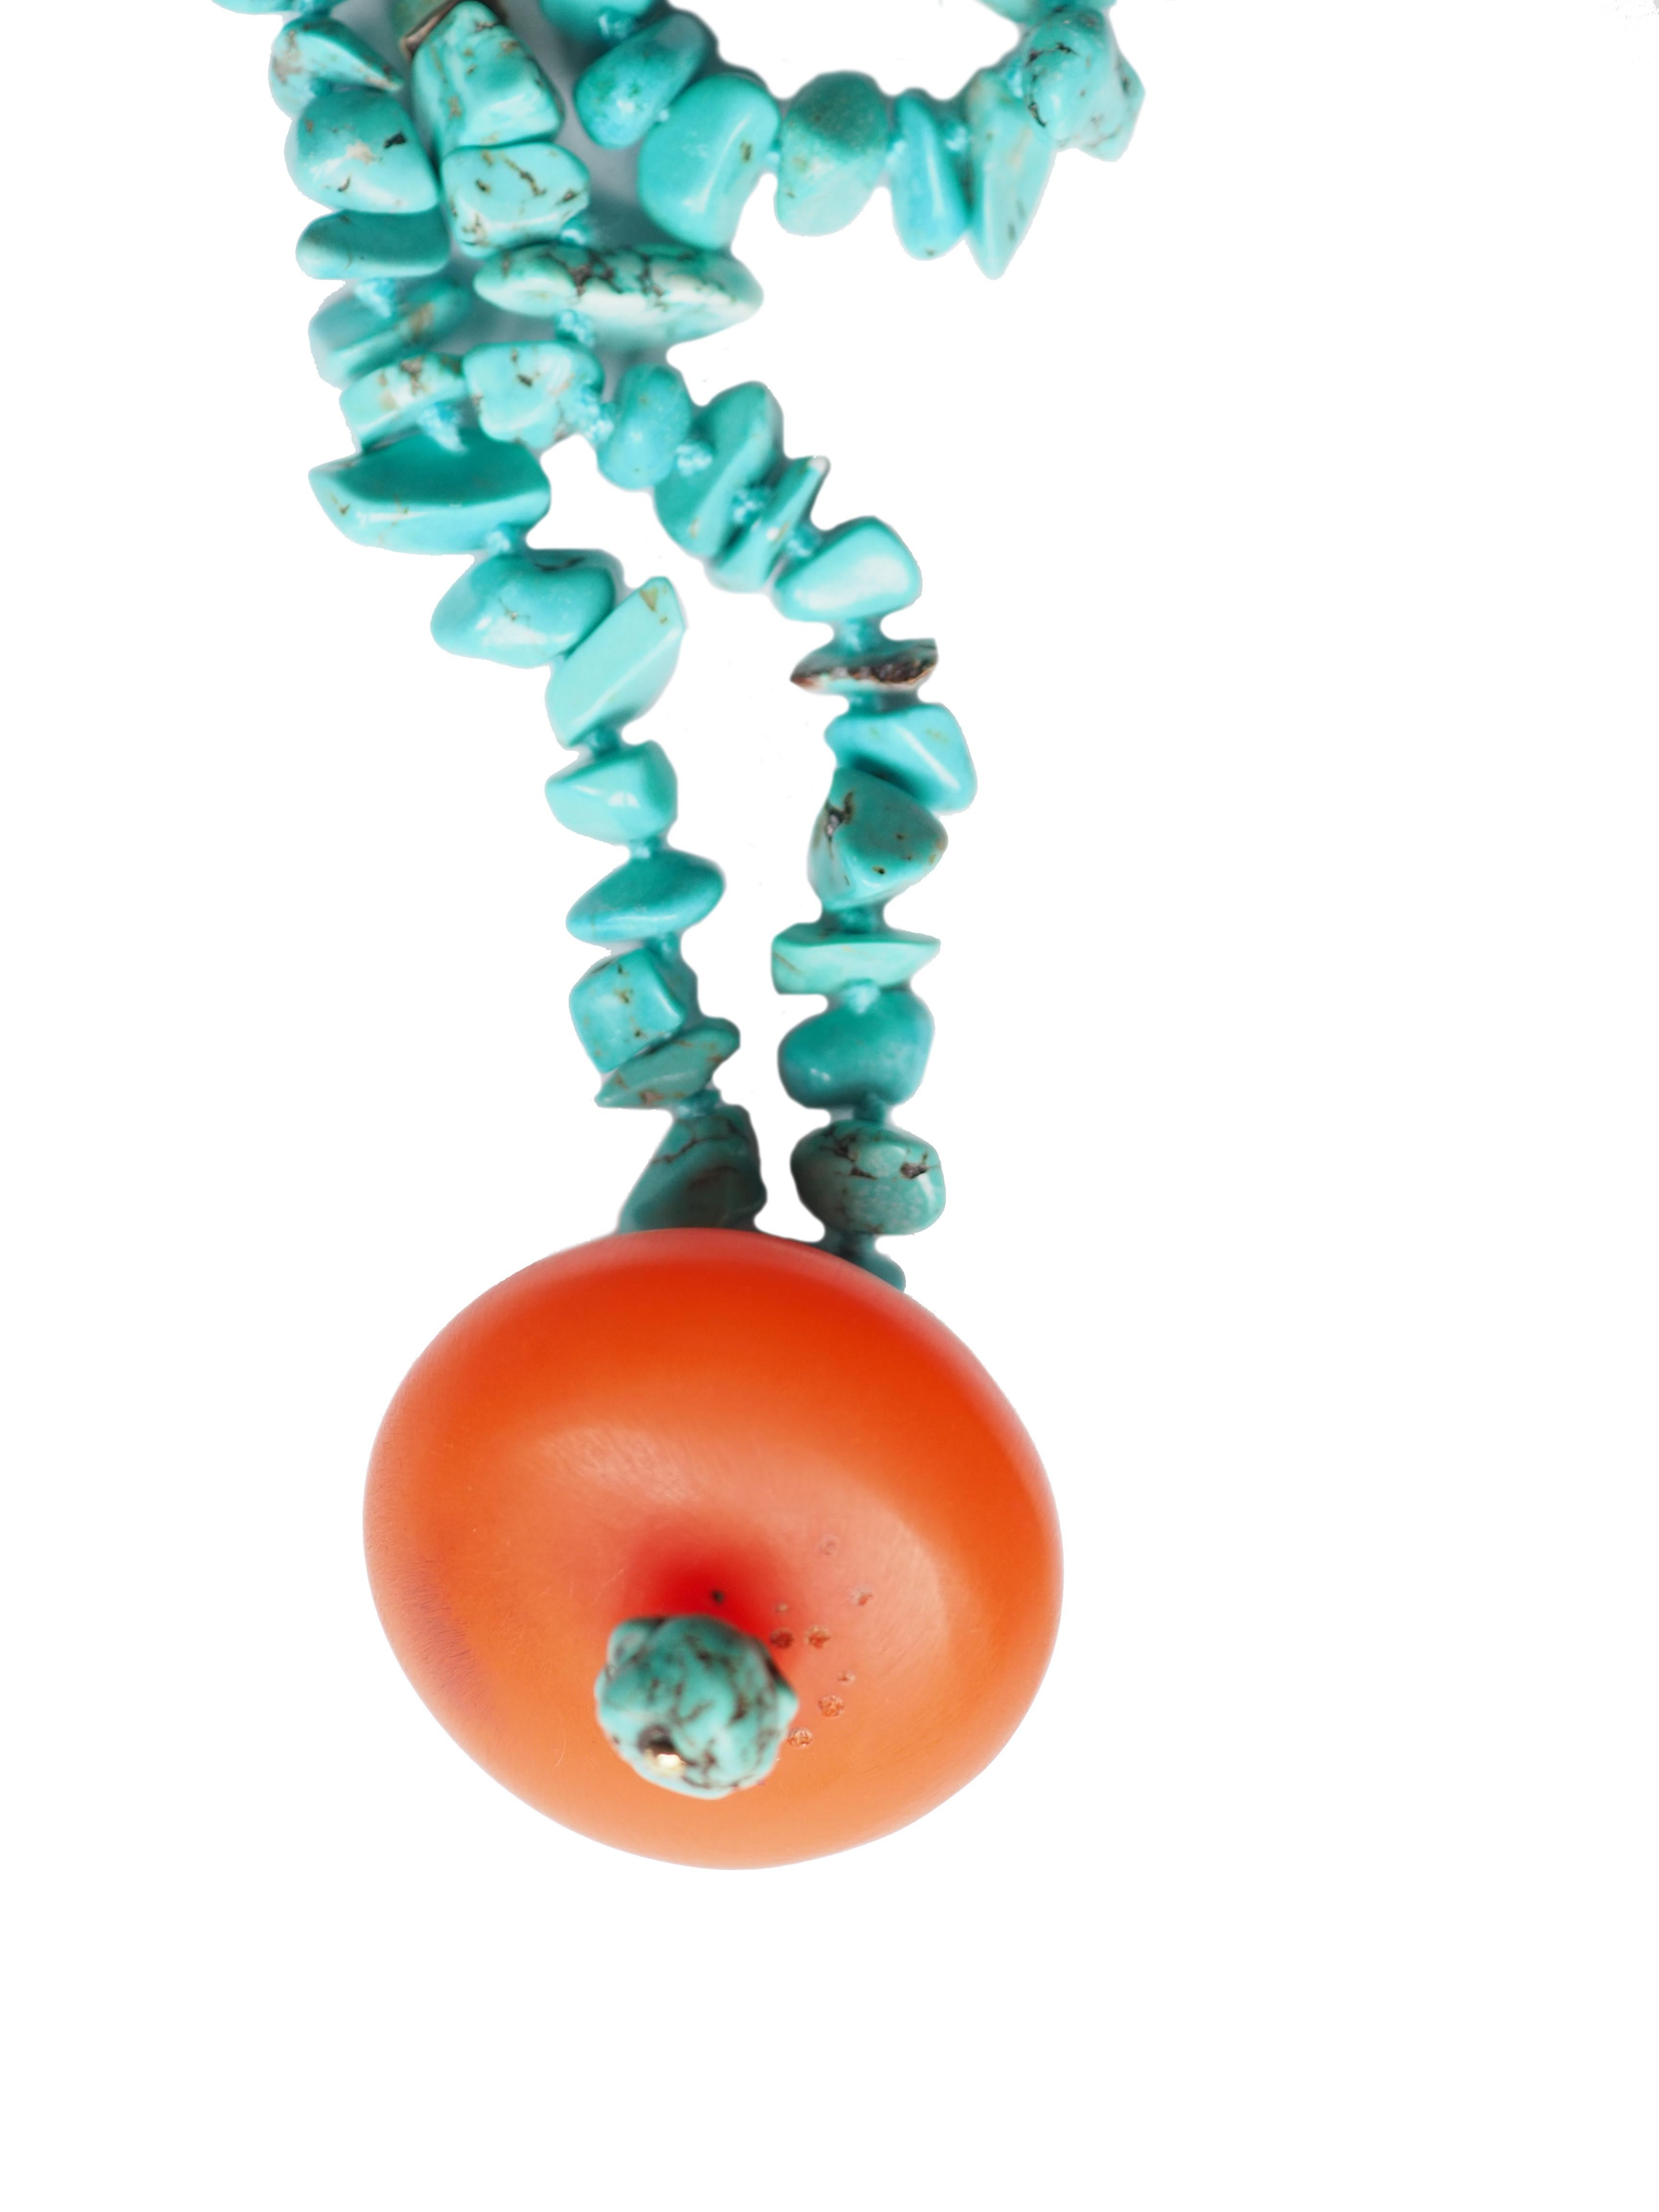 Necklace Turquoise  butter scotch Amber 18 kt Gold gr 2,3. Total lenkt 90cm.
All Giulia Colussi jewelry is new and has never been previously owned or worn. Each item will arrive at your door beautifully gift wrapped in our boxes, put inside an